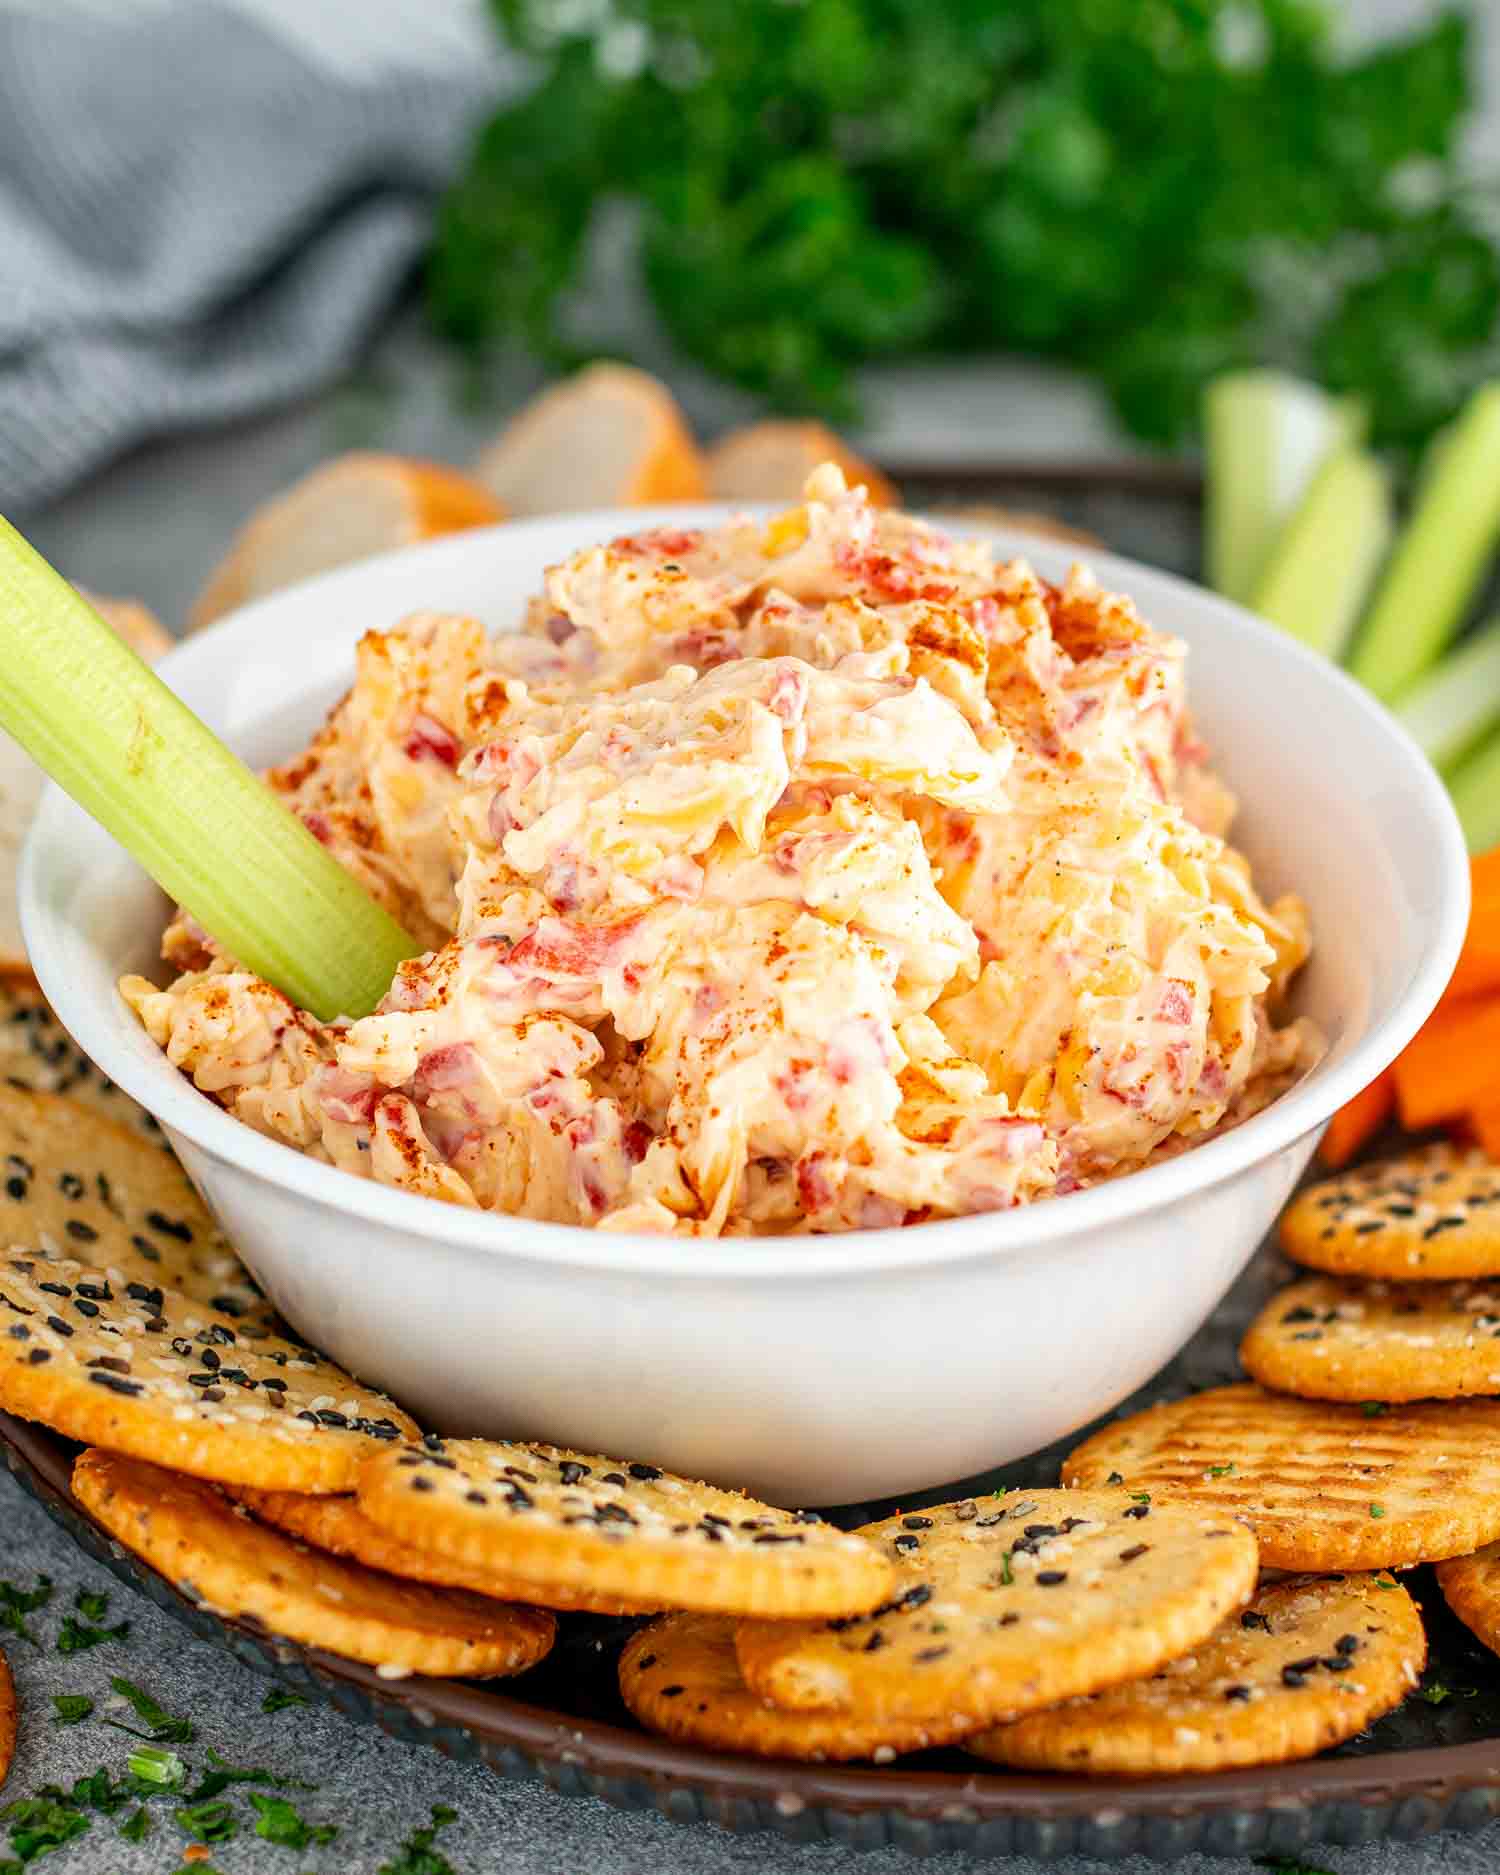 pimento cheese in a white bowl along some crackers, celery and carrot sticks.